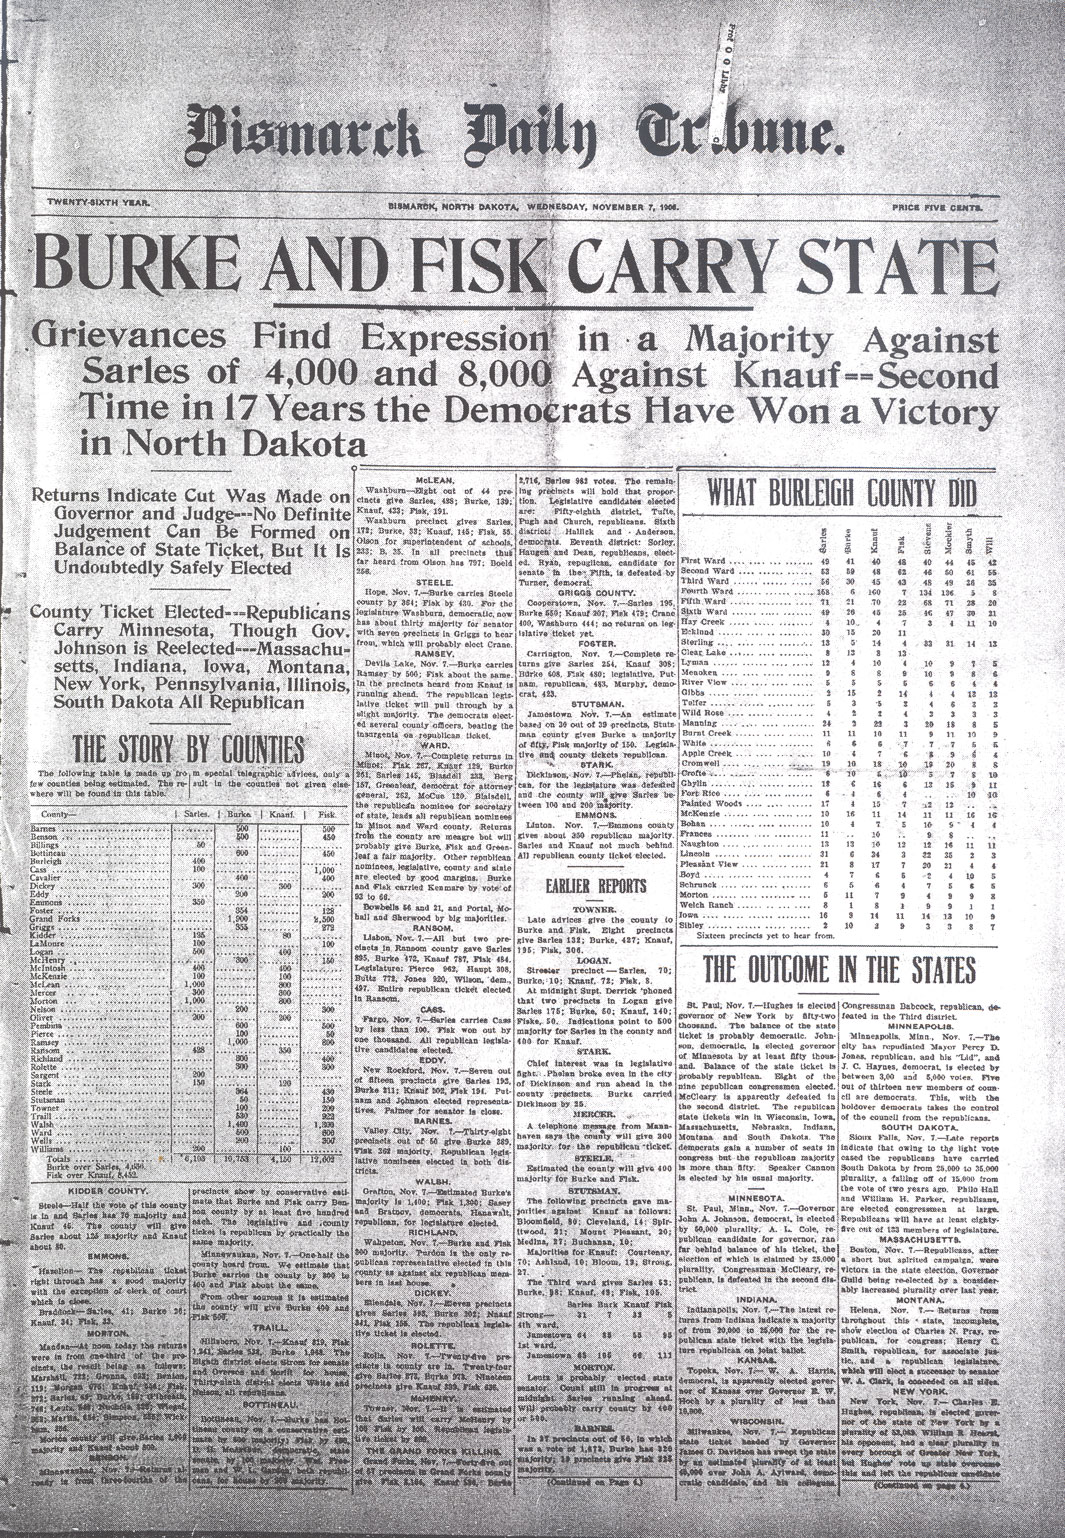 The Bismarck Tribune headlines brought news of Burke’s election and reflect the voters’ discontent with McKenzie’s politics.  The voters were ready to bring honesty to North Dakota politics.  Voters may have been influenced by  The Spoilers, a novel by Rex Beach that revealed McKenzie’s theft of gold and corruption of the federal judicial system in Alaska.  